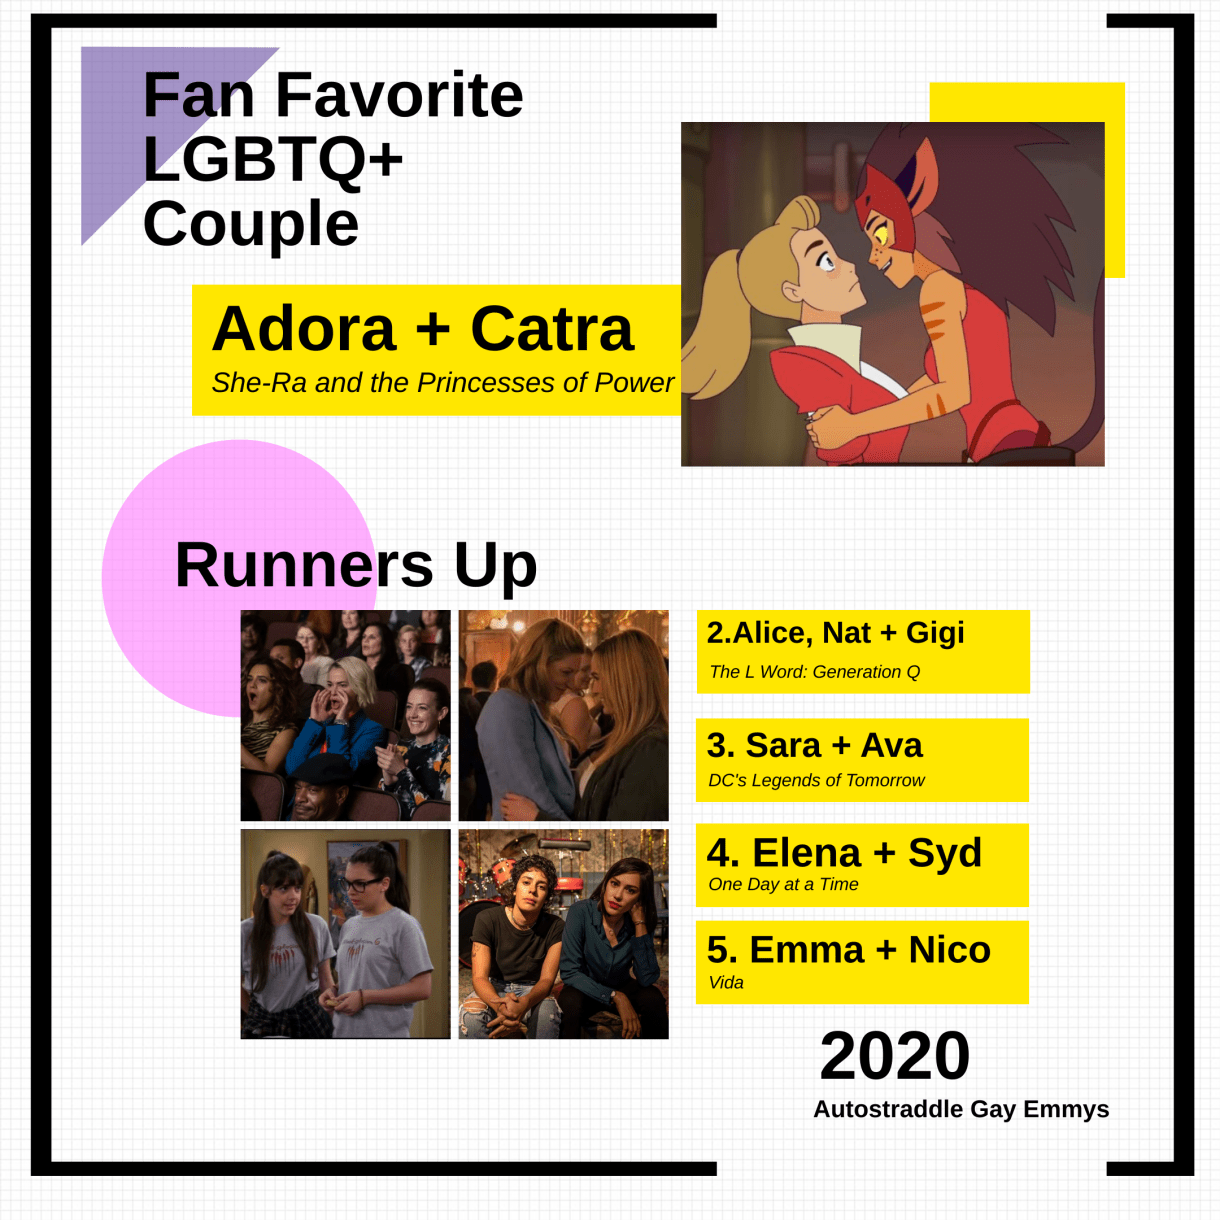 Fan Favorite Couple Graphic. Winners: 1. Adora and Catra (She-Ra and the Princesses of Power), 2. Alex, Nat and Gigi (The L Word Generation Q), 3. Sara and Ava (Legends of Tomorrow), 3. Elena & Syd (One Day at a Time), 4. Emma & Nico (Vida)